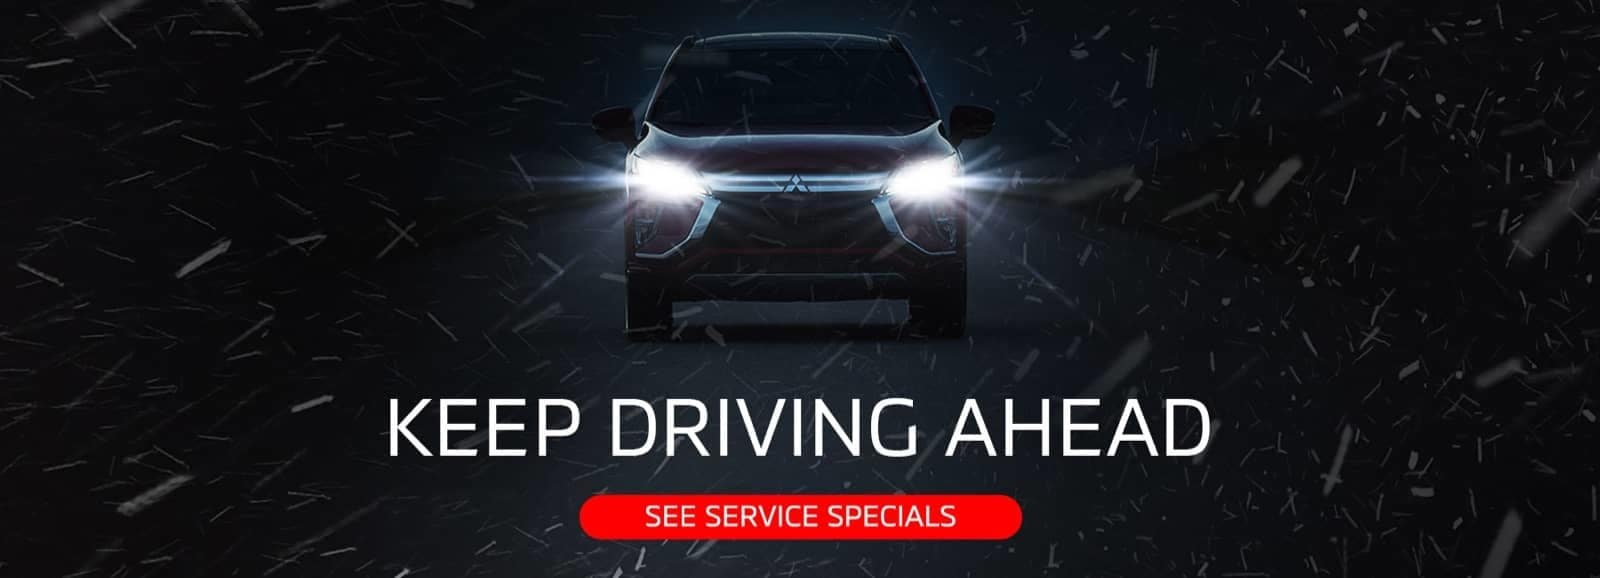 Keep Driving Ahead - See Service Specials